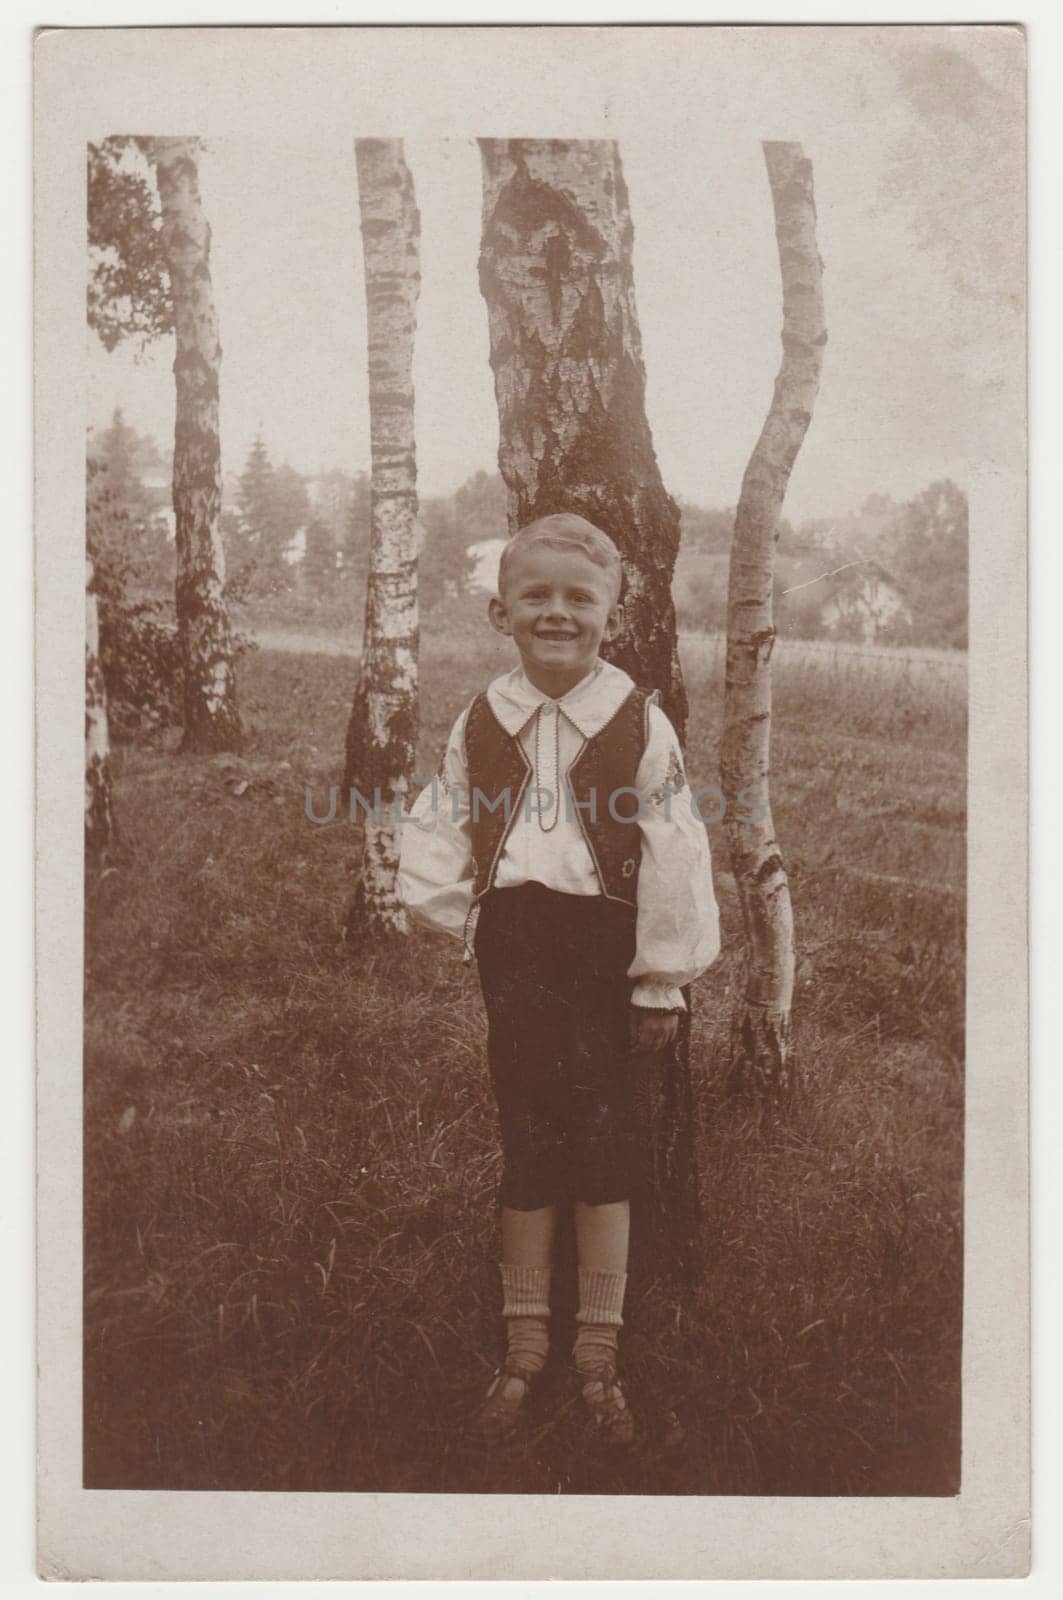 Vintage photo shows a small boy outside. Silver birches are on the background. Retro black and white photography. by roman_nerud